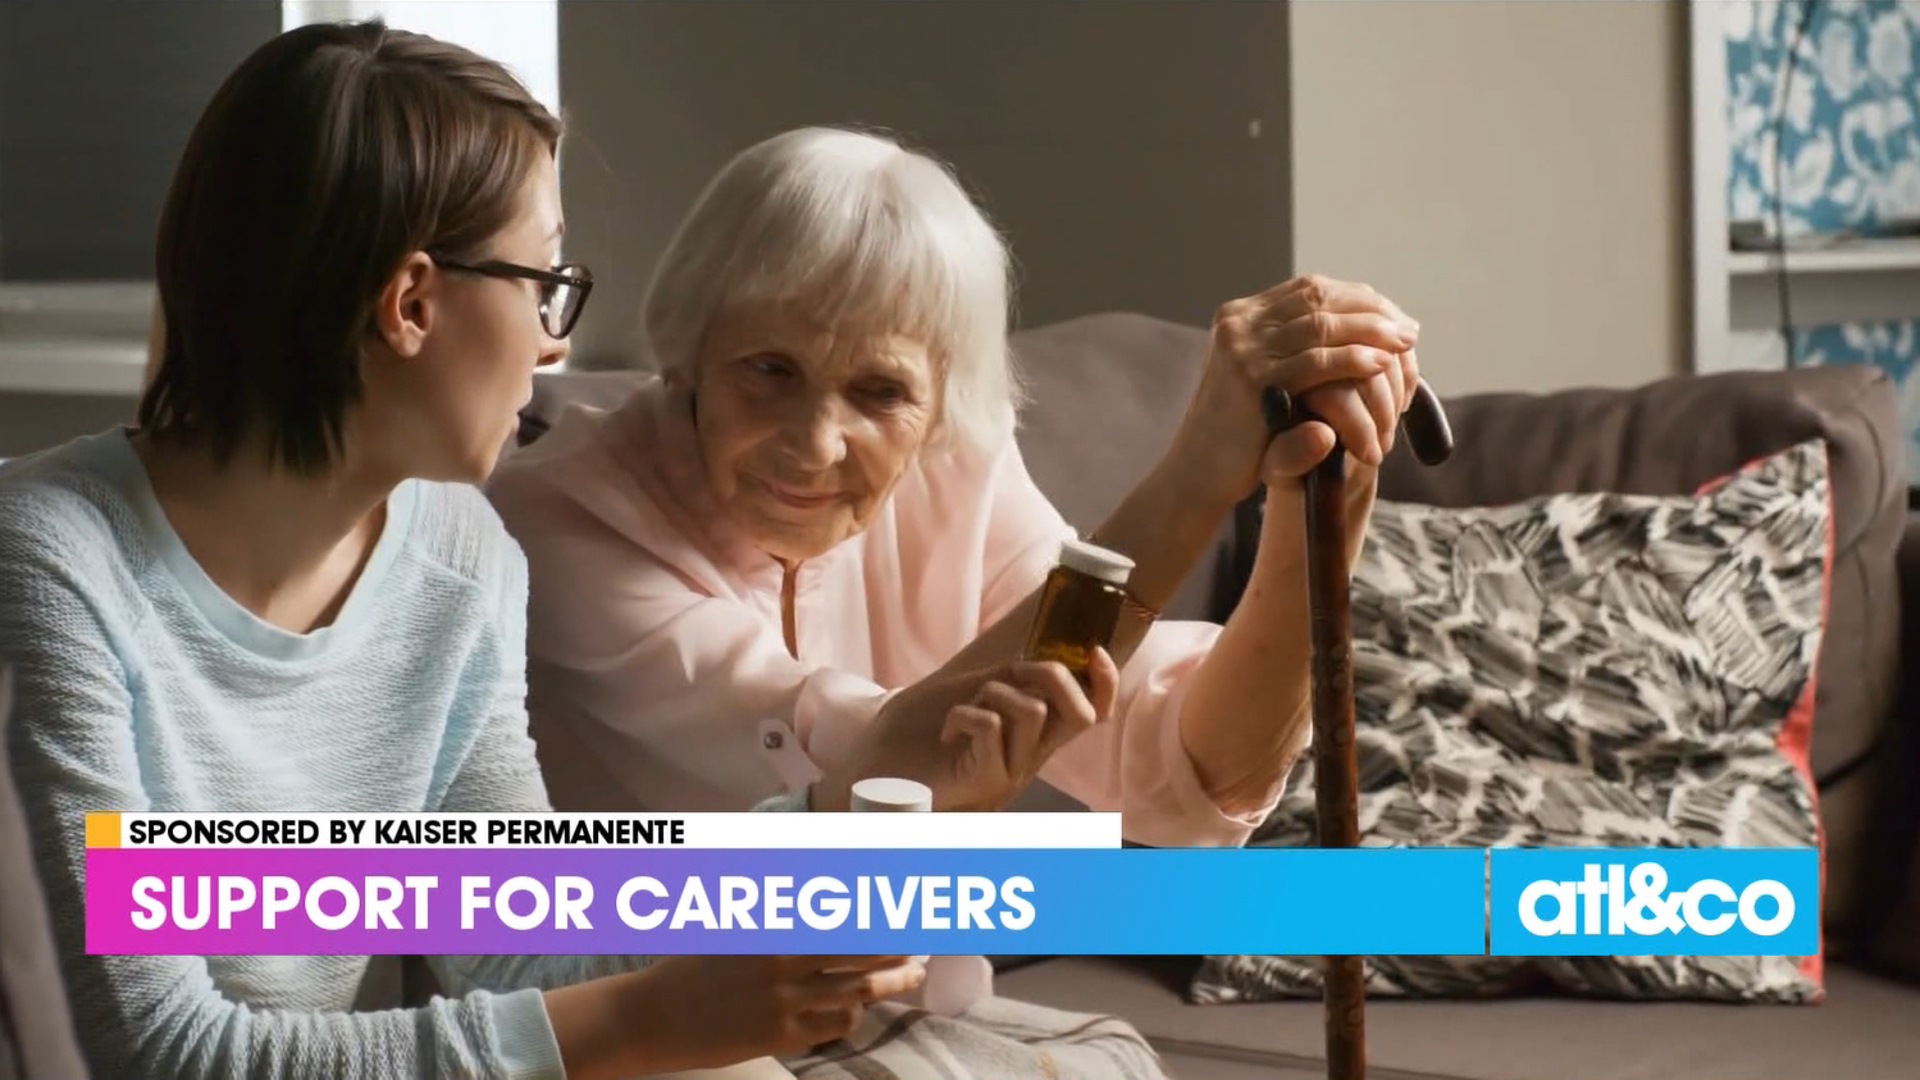 From communicating effectively to personal downtime, get top tips for caregiving from Kaiser Permanente.